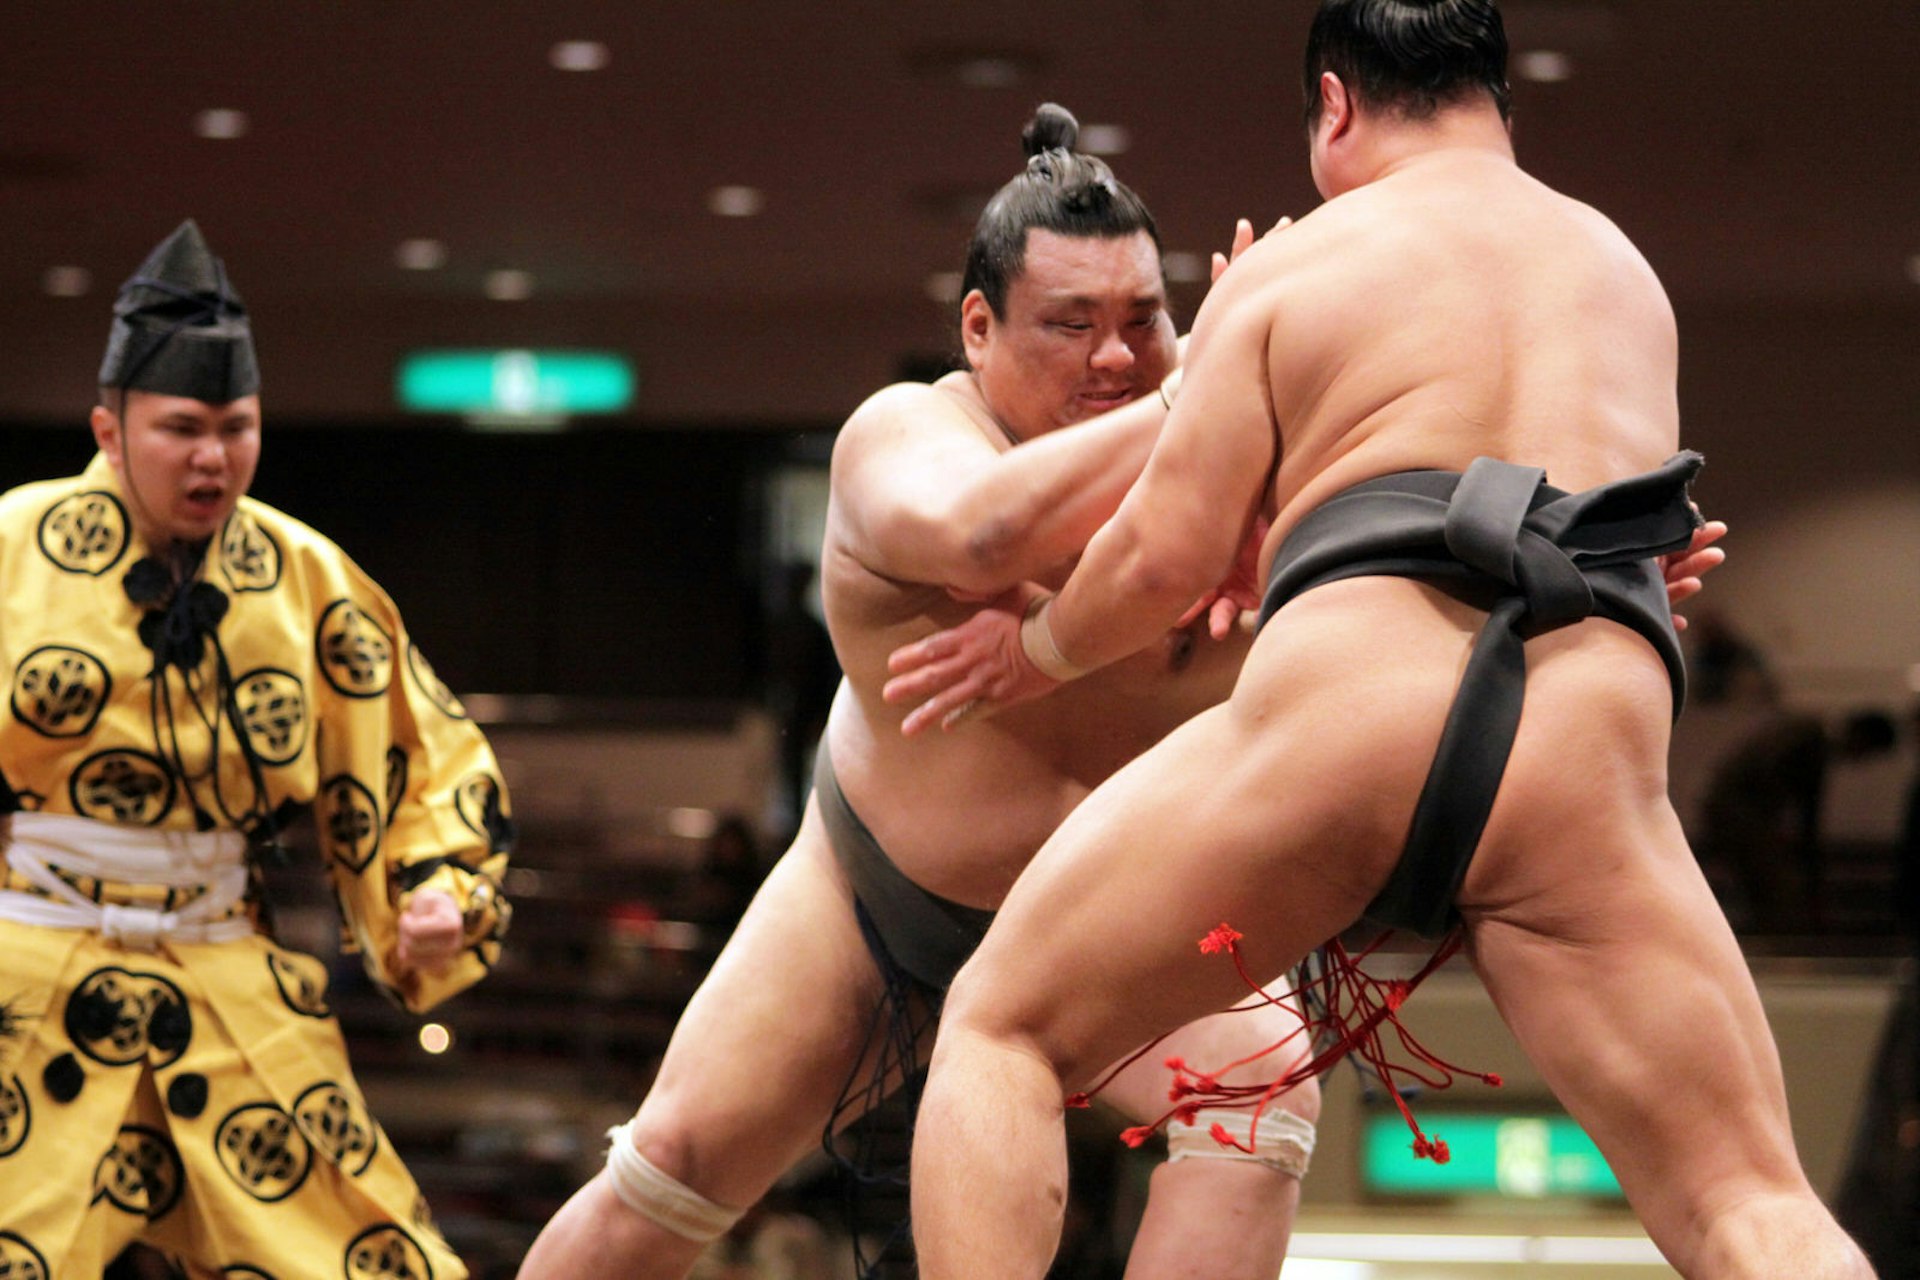 Two sumo wrestlers, their hair tied in top knots, grip one another in a standoff as the referee, clad in a yellow robe, oversees them, at the Tokyo Grand Sumo Tournament, Japan